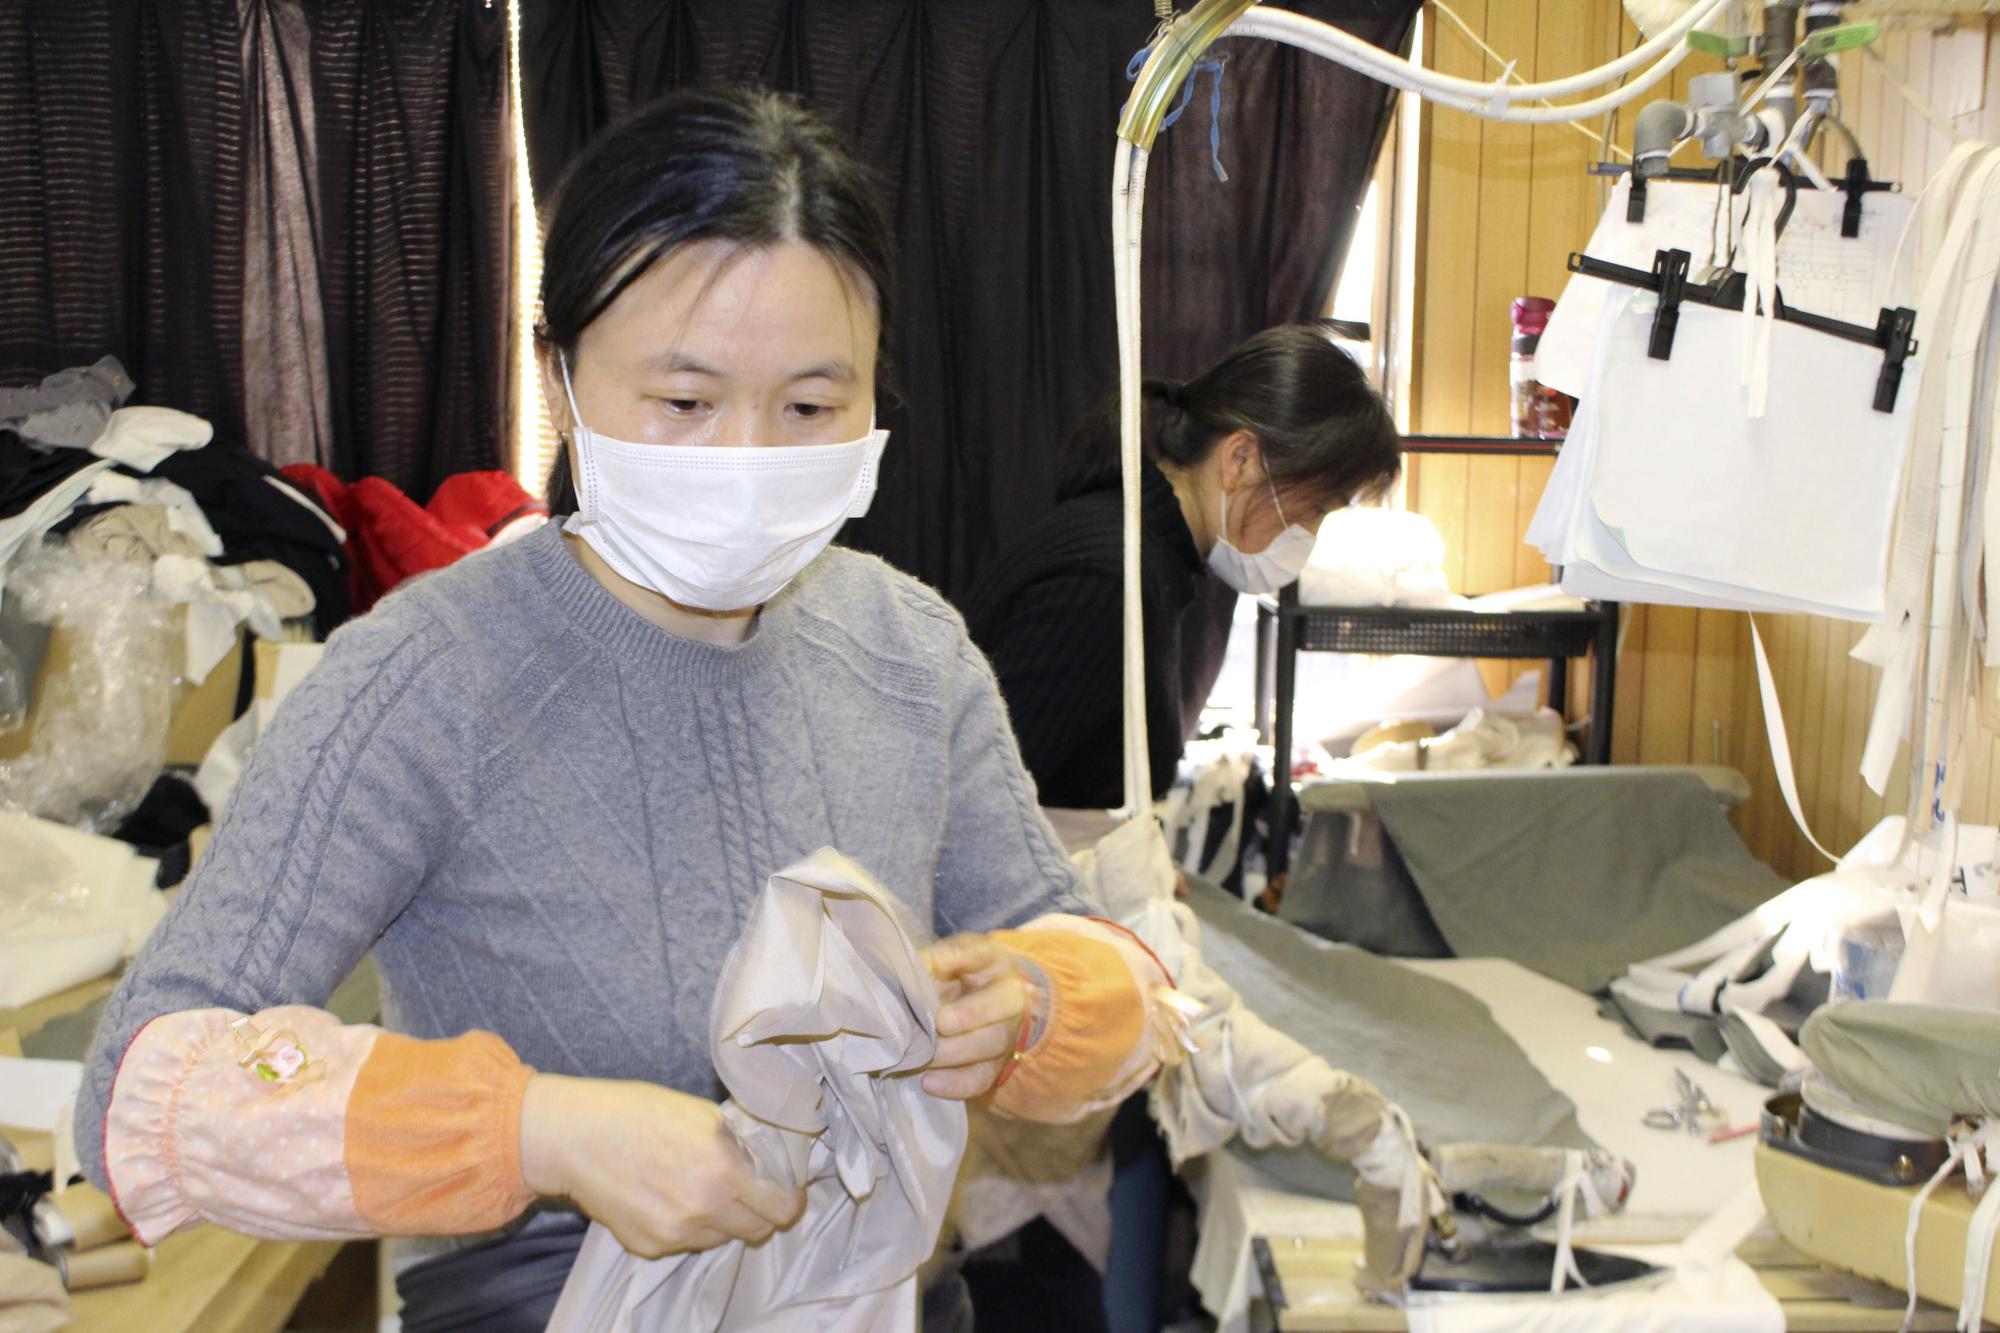 A Chinese trainee works at a sewing factory in the city of Gifu on Tuesday. Many Chinese workers haven't been able to start their training programs in Japan due to entry restrictions linked to the new coronavirus, causing a labor shortage in several sectors. | KYODO